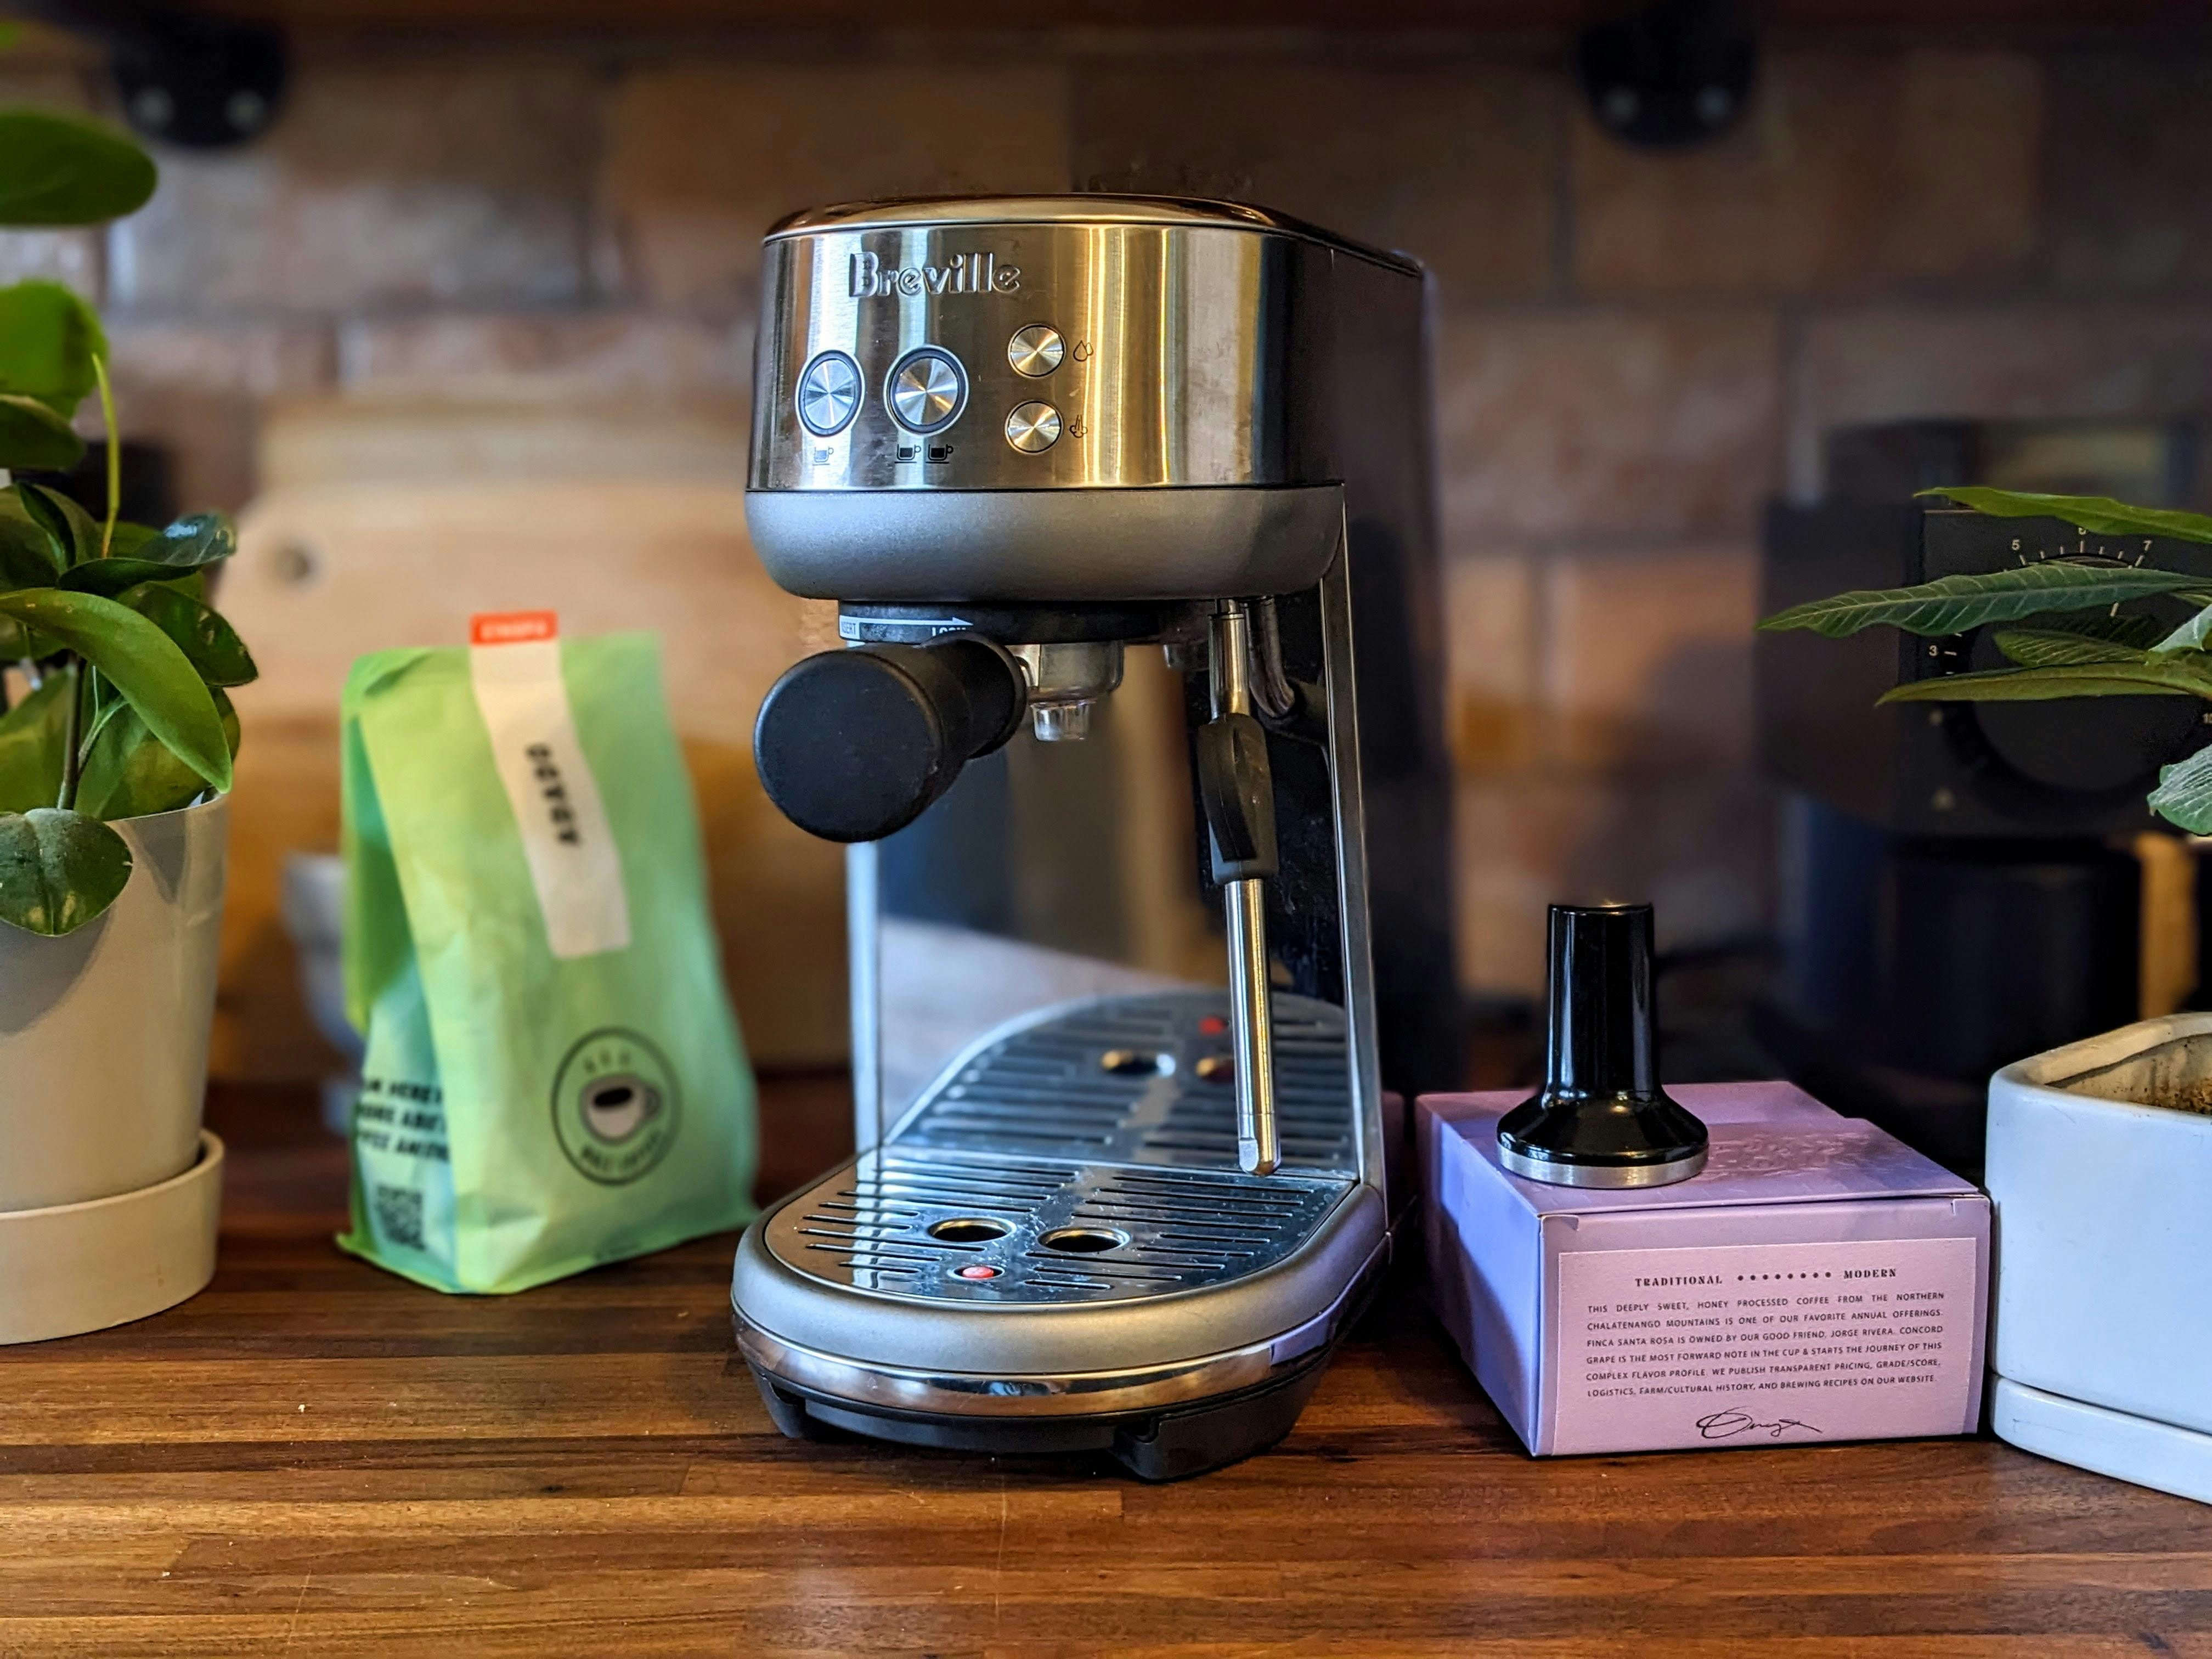 The Flair Pro 2 Review: For The True Espresso-Lover - Baked, Brewed,  Beautiful